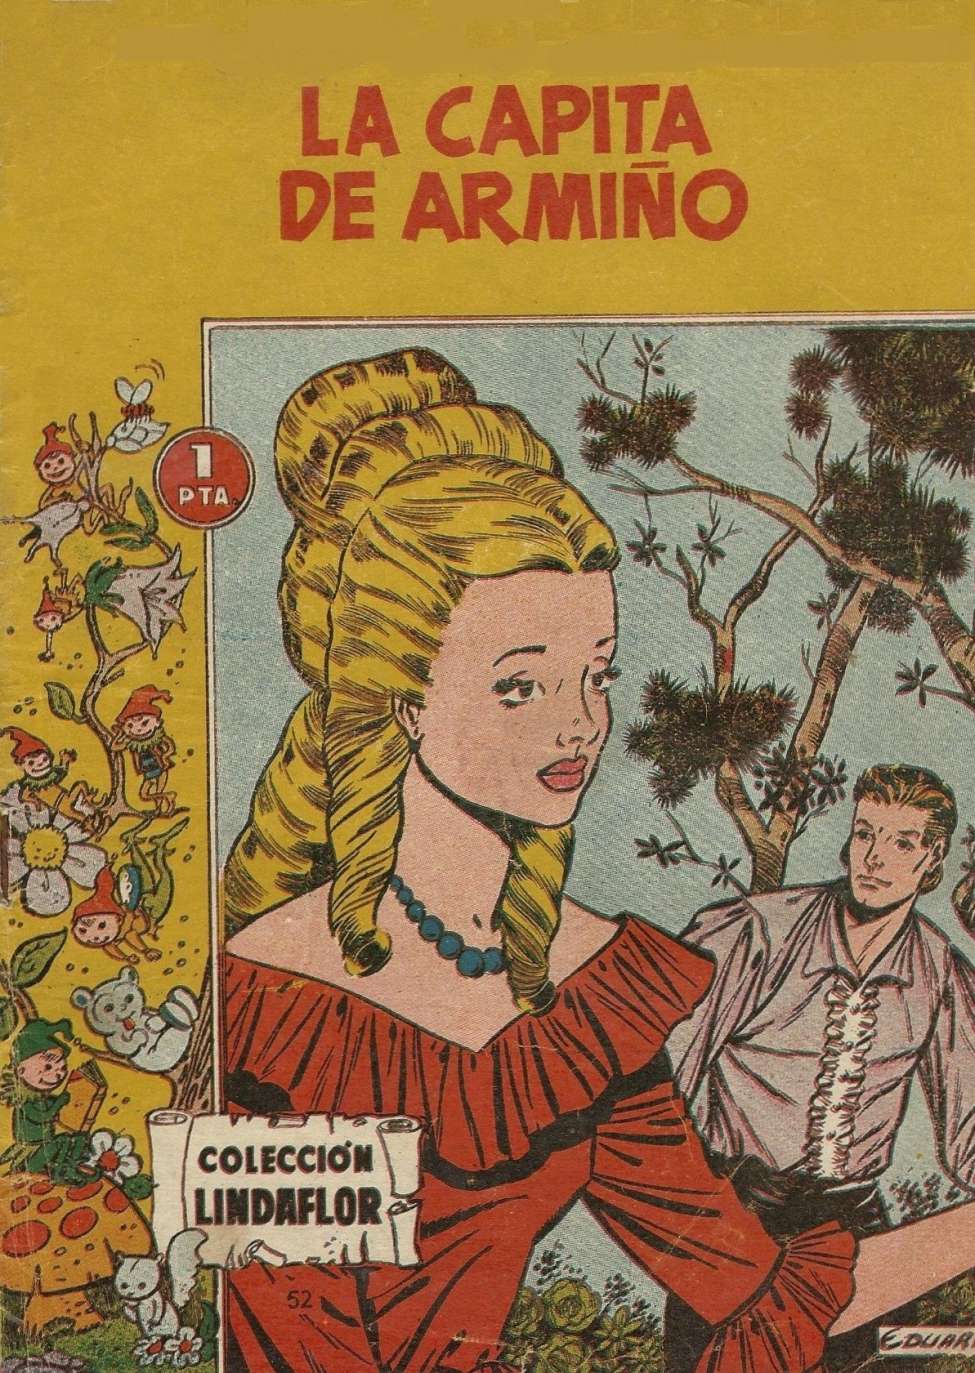 Comic Book Cover For Lindaflor 52